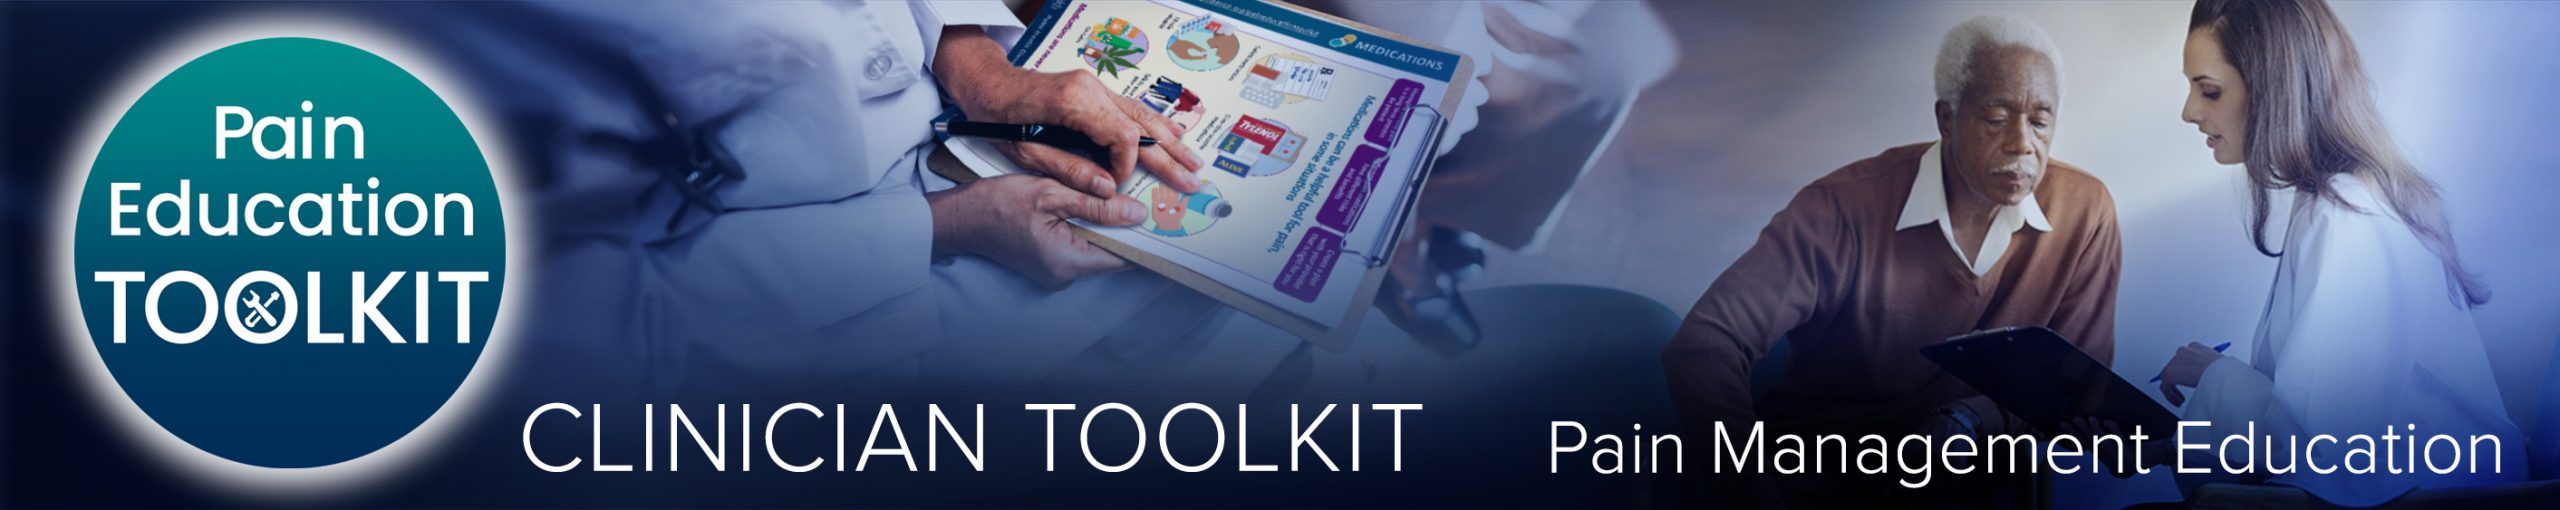 Pain Education Toolkit for Clinicians